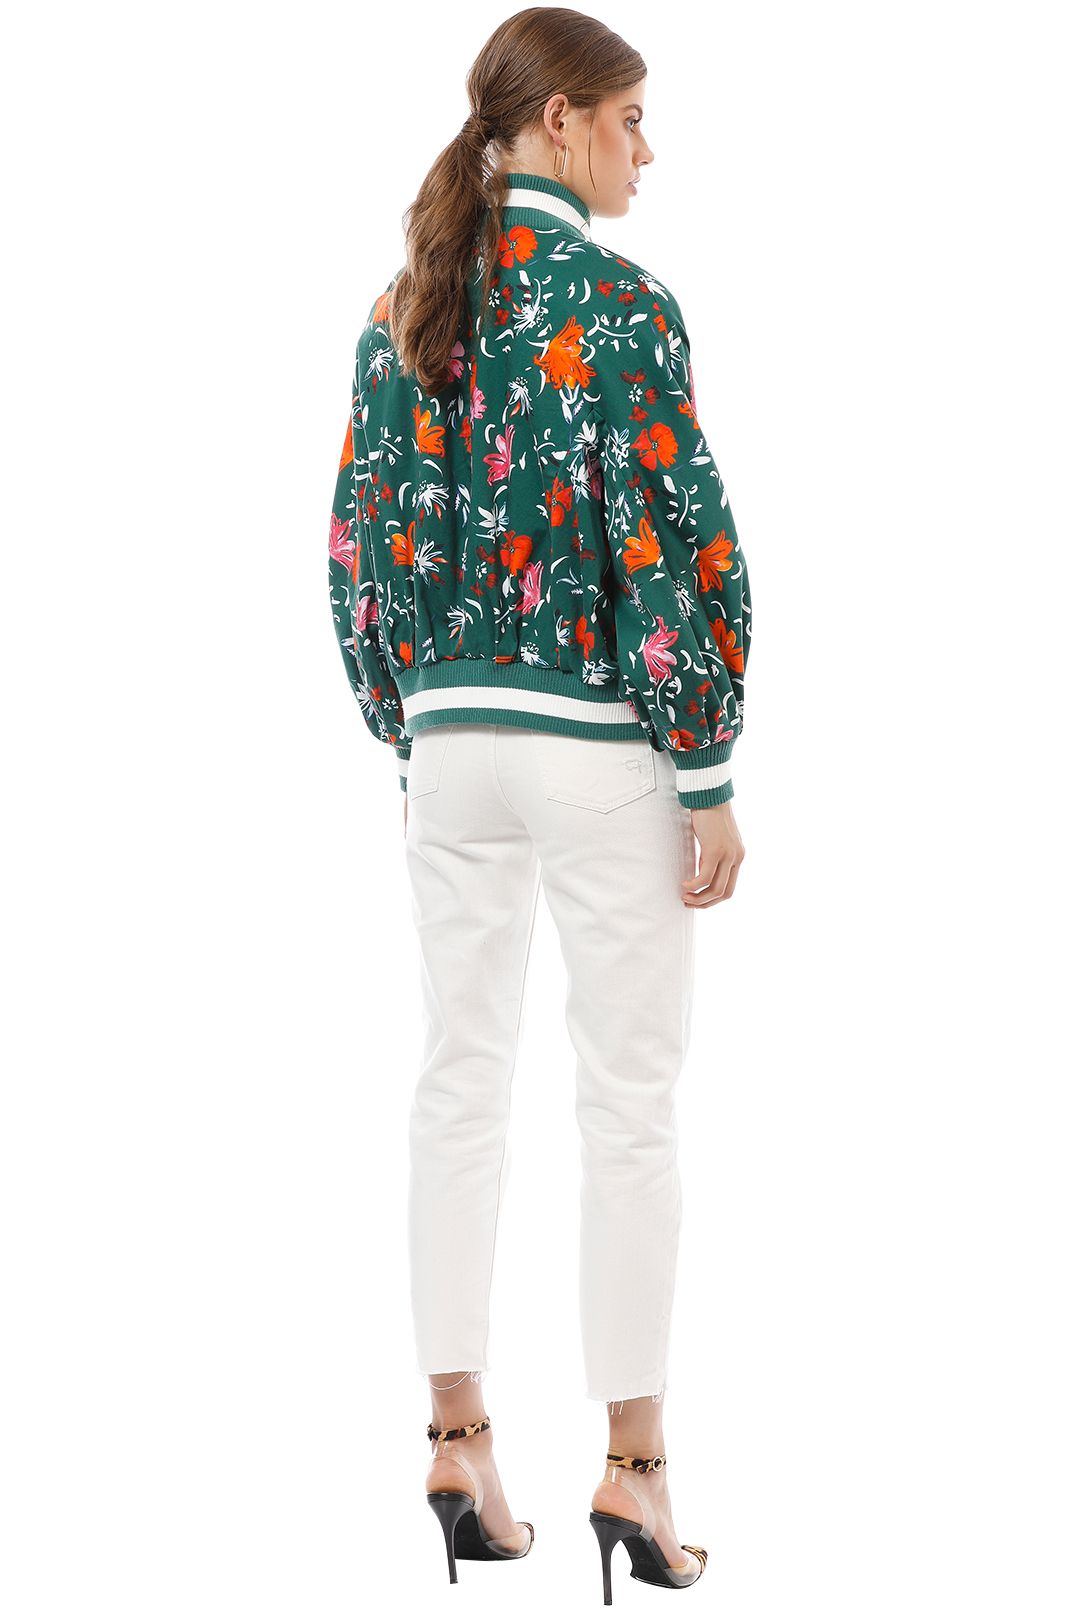 CMEO Collective - Elation Bomber - Green Floral - Back